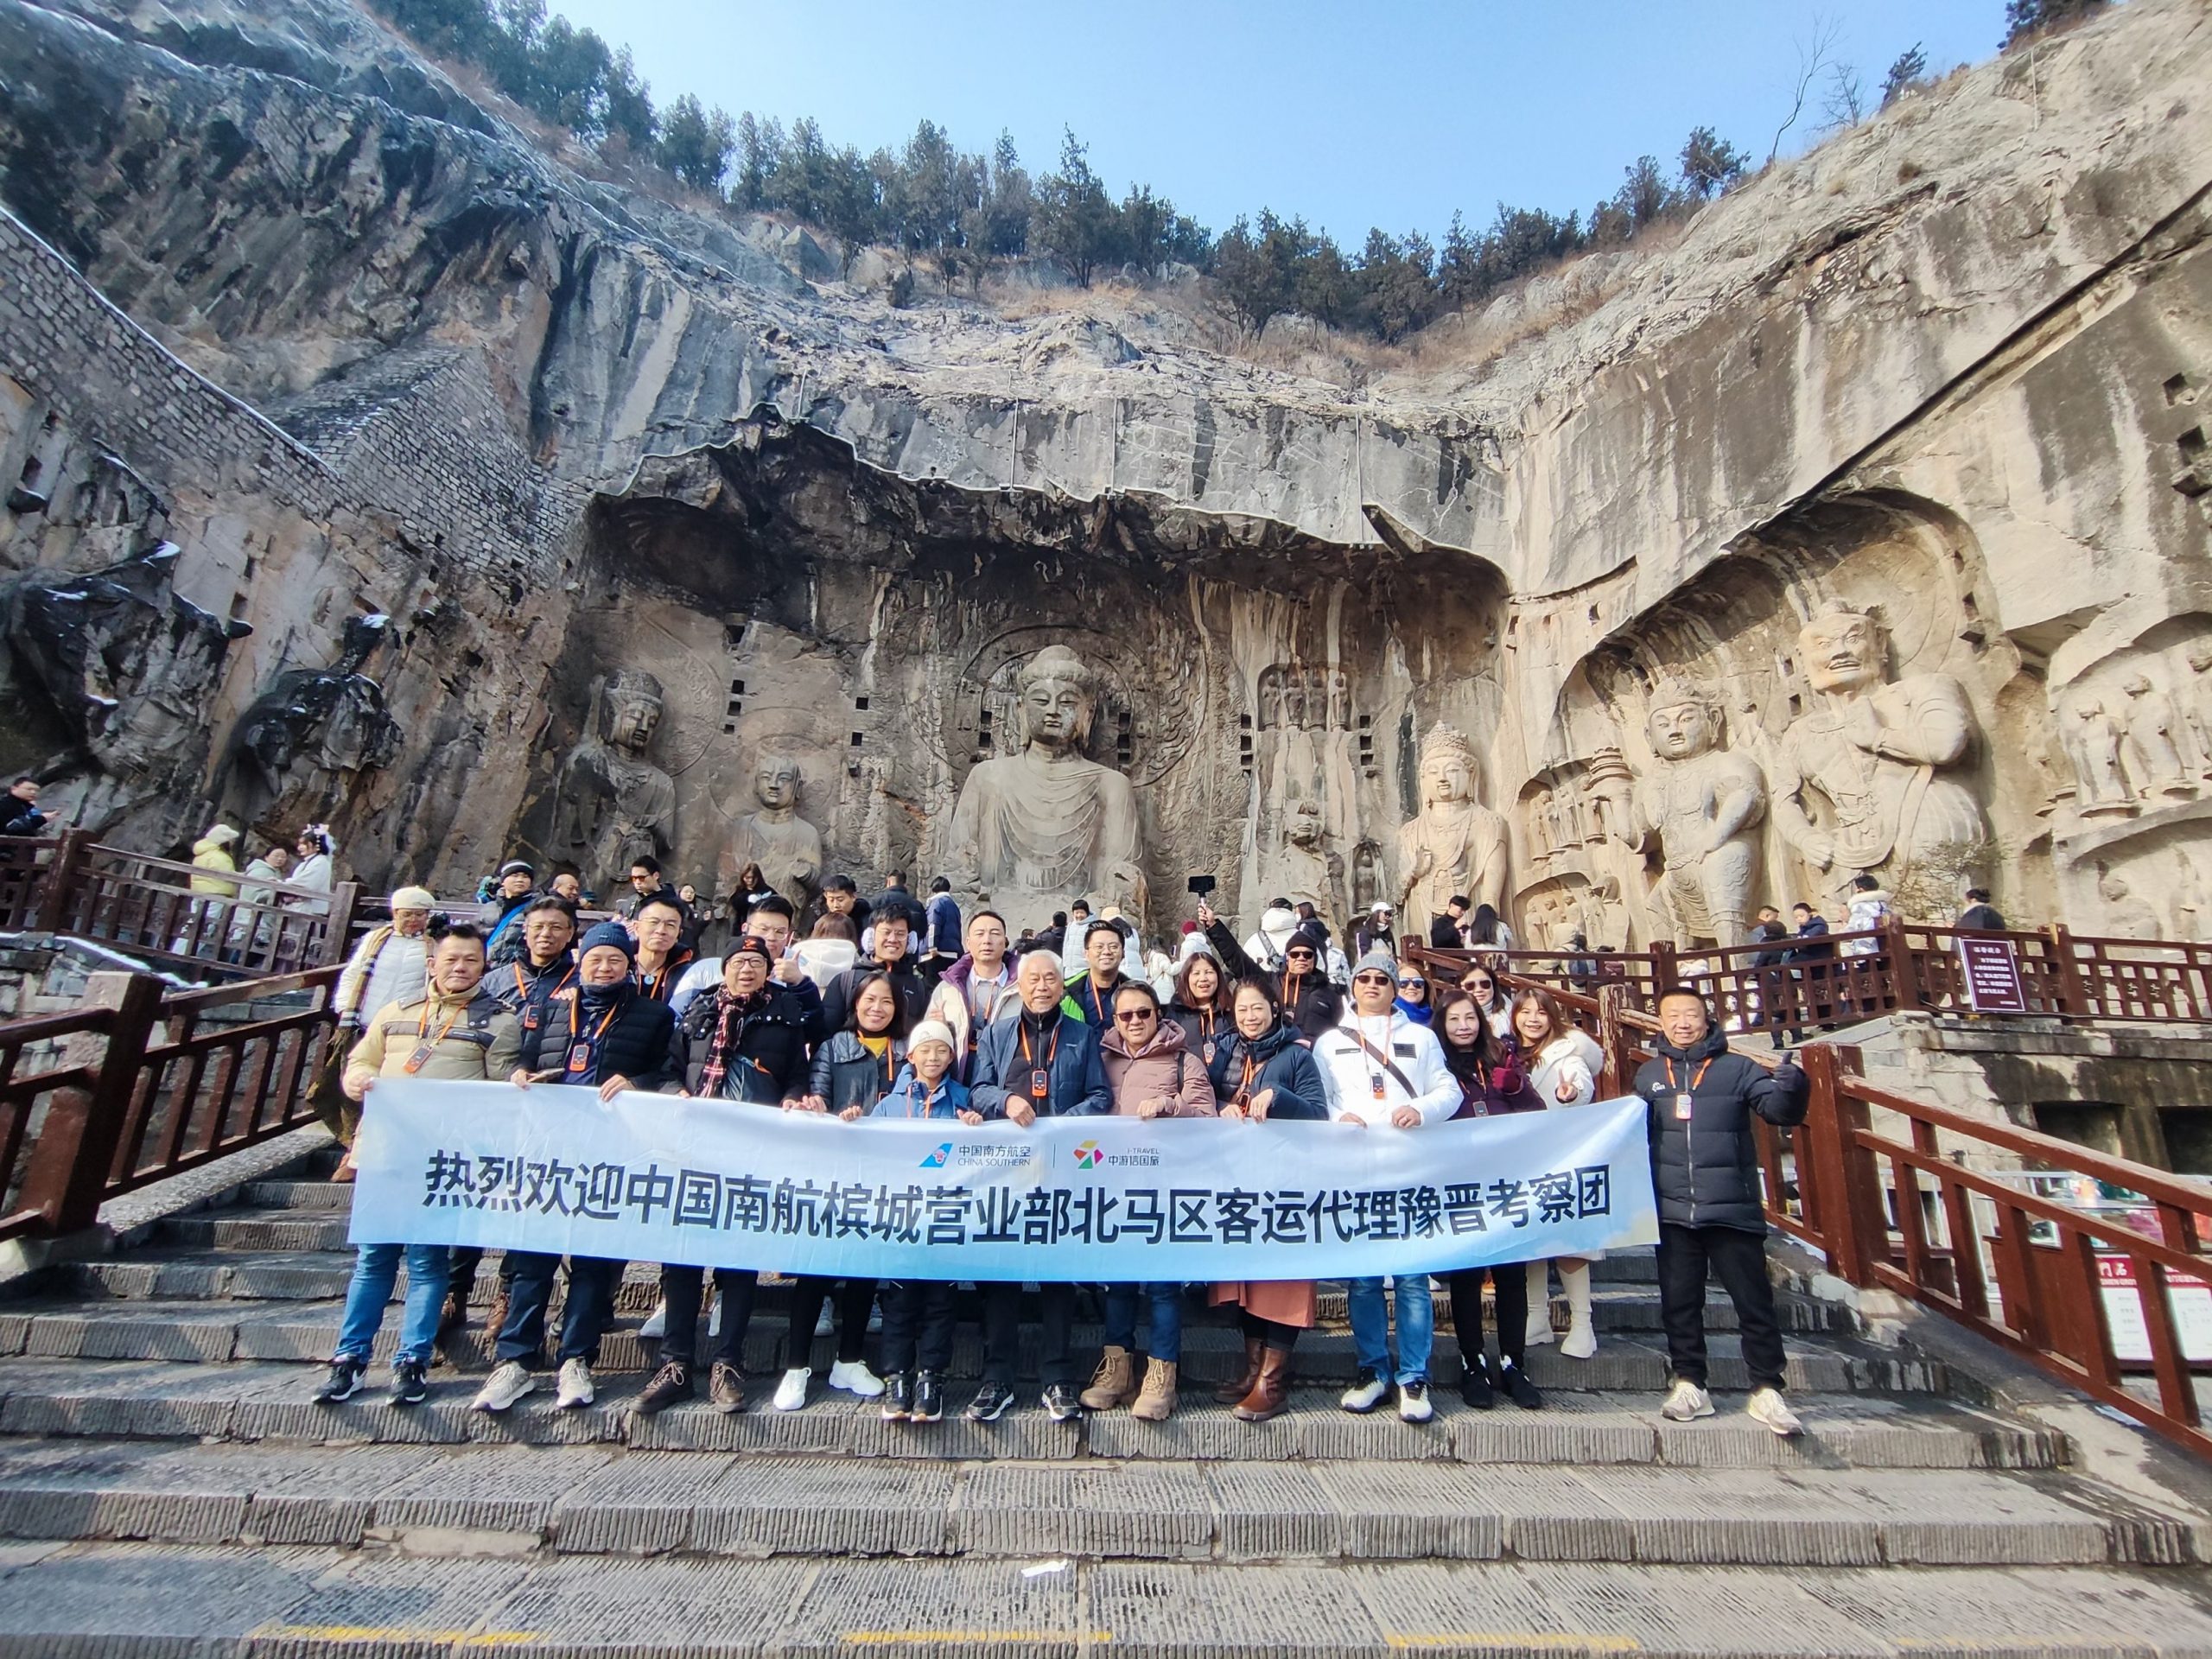 The group left a profound memory at Longmen Grottoes.